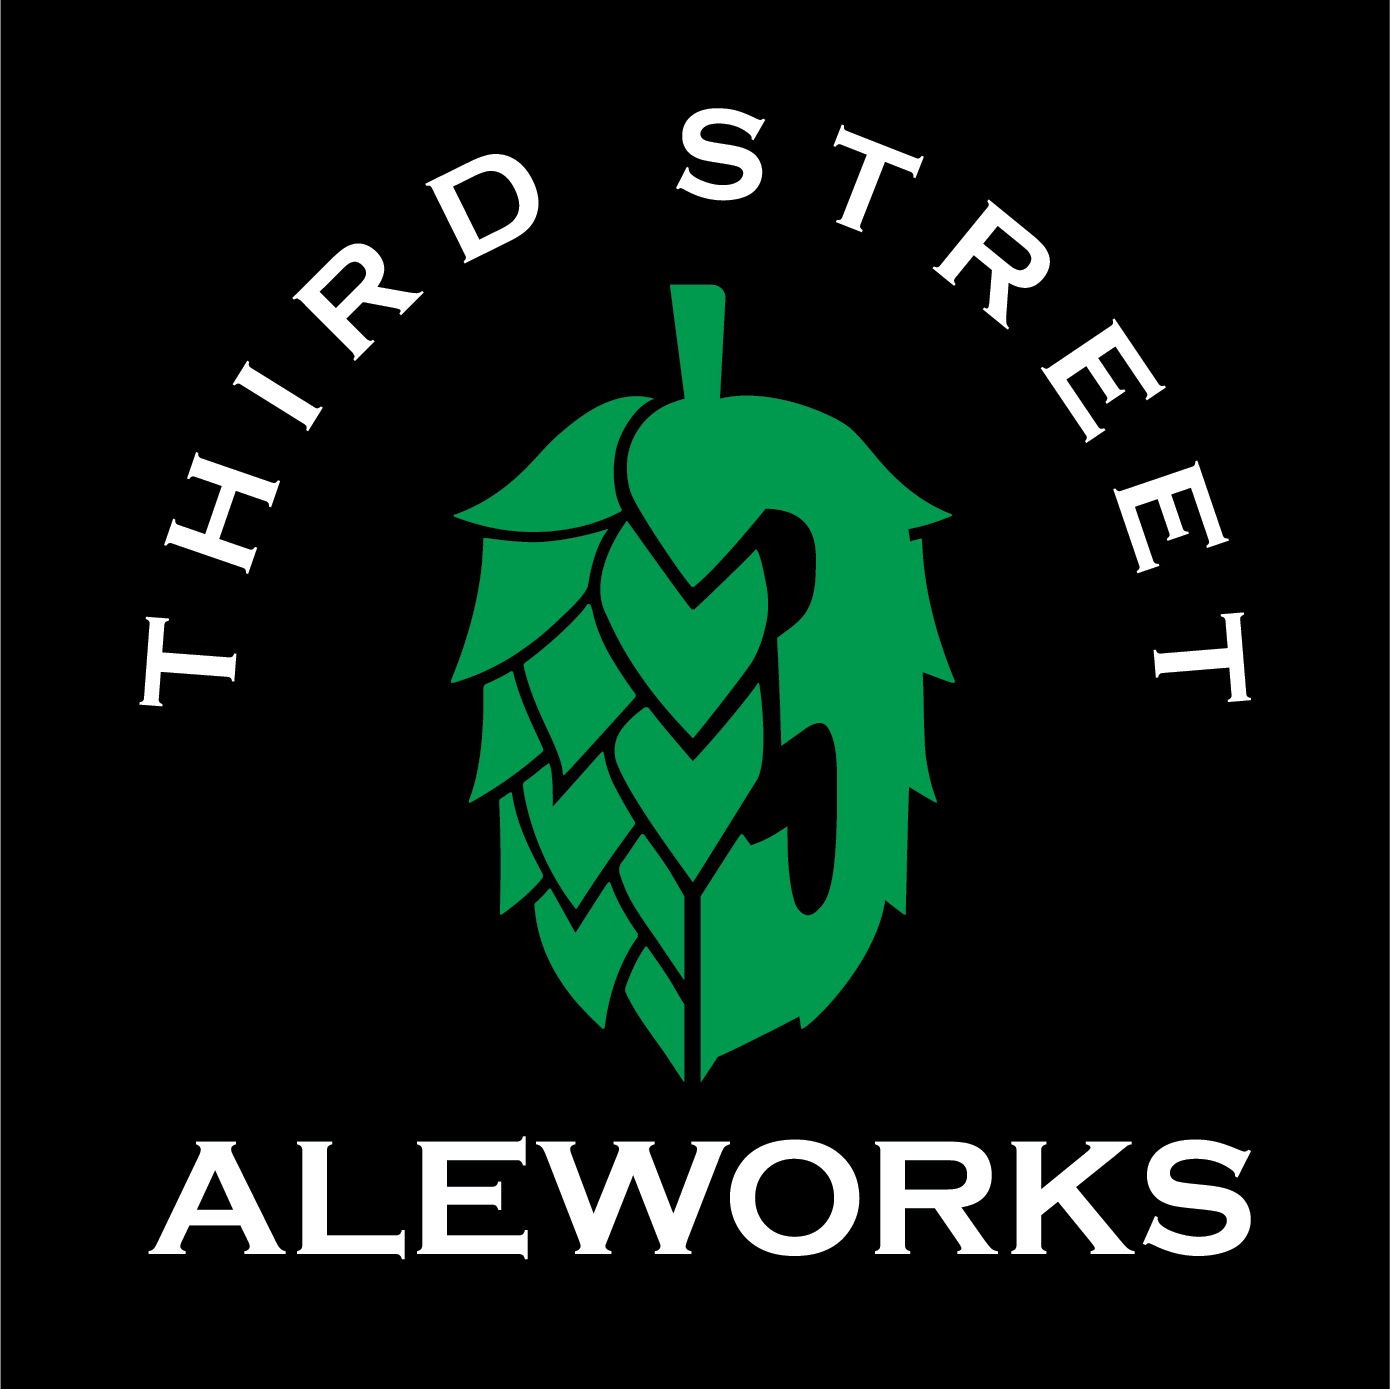 Welcome to Third Street Aleworks!